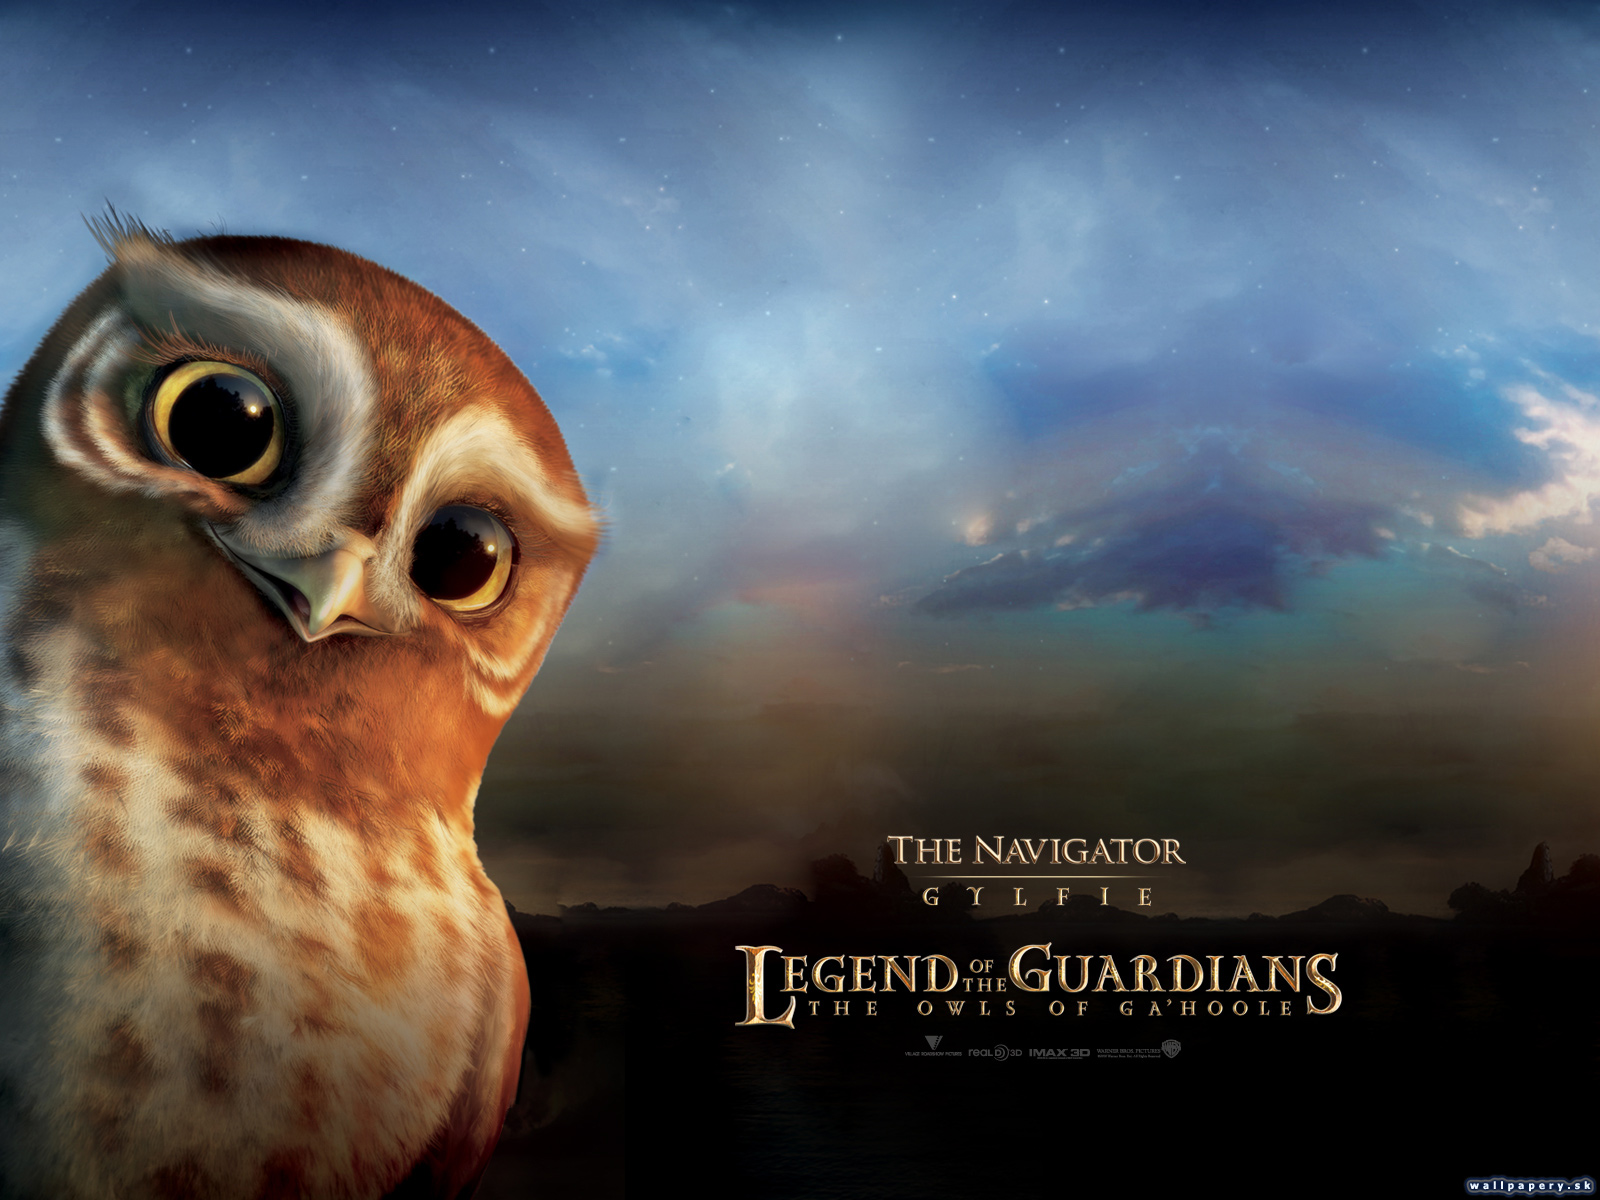 Legend of the Guardians: The Owls of Ga'Hoole - wallpaper 3